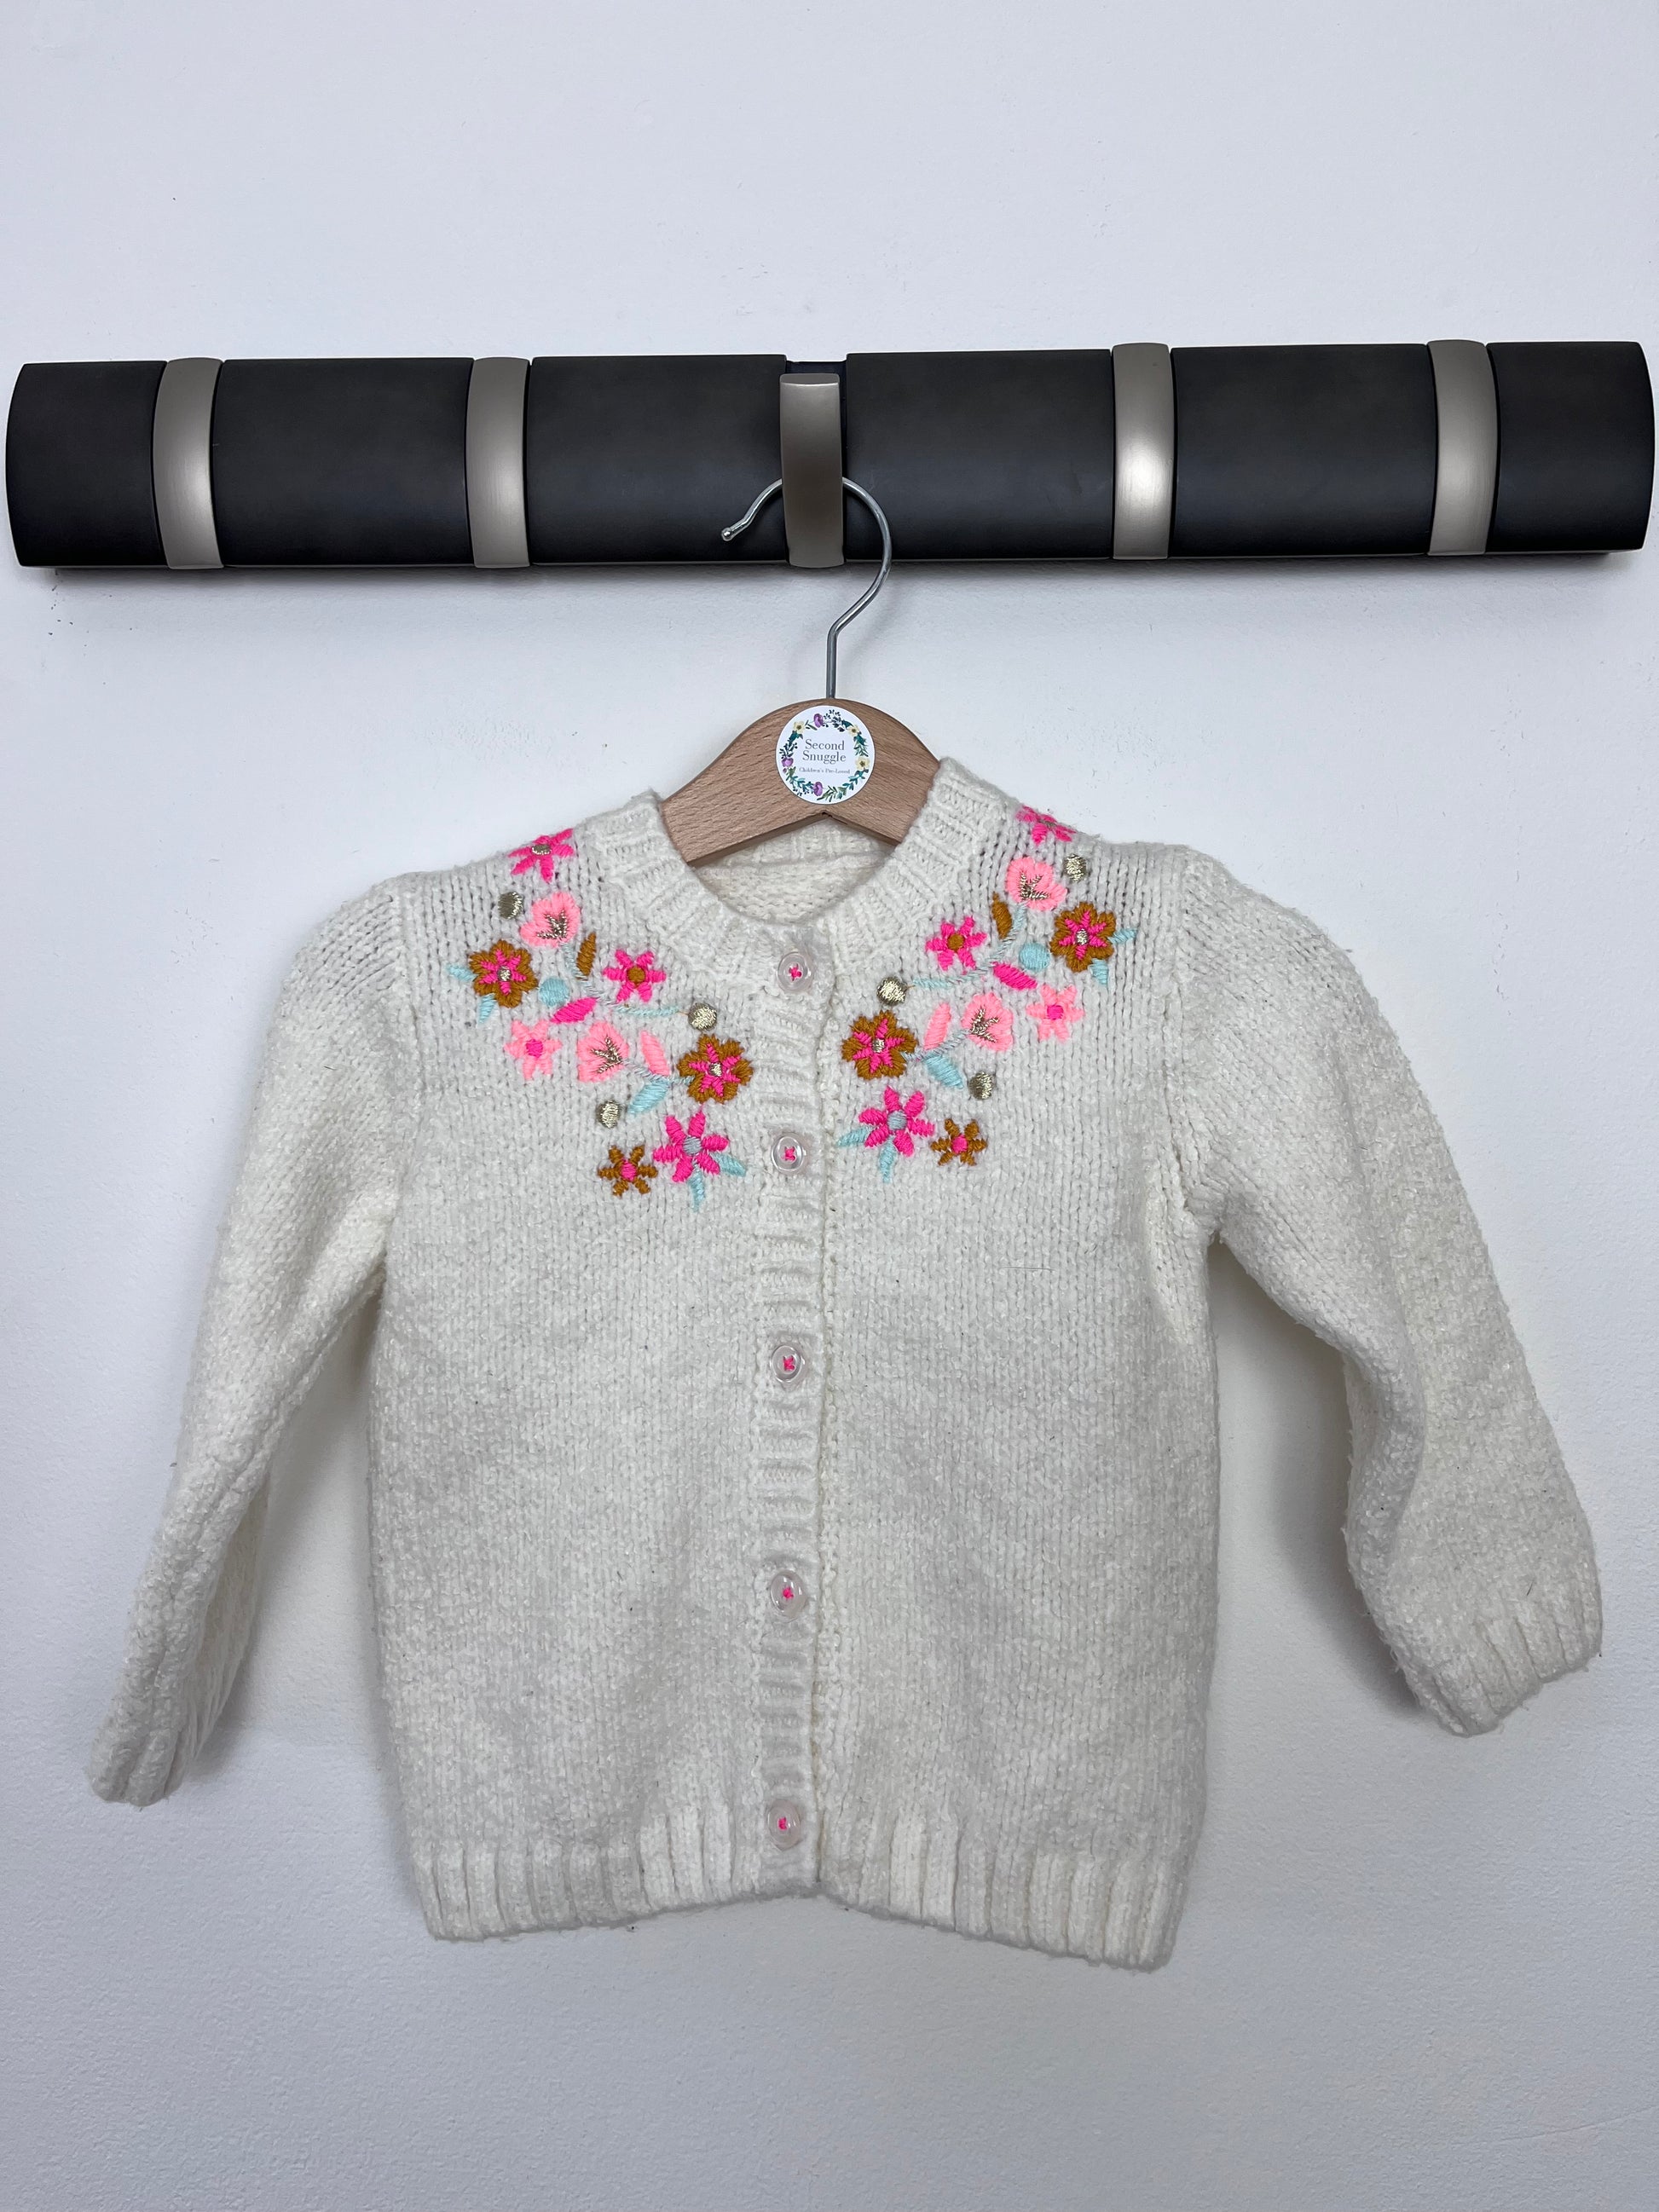 Matalan 9-12 Months-Cardigans-Second Snuggle Preloved